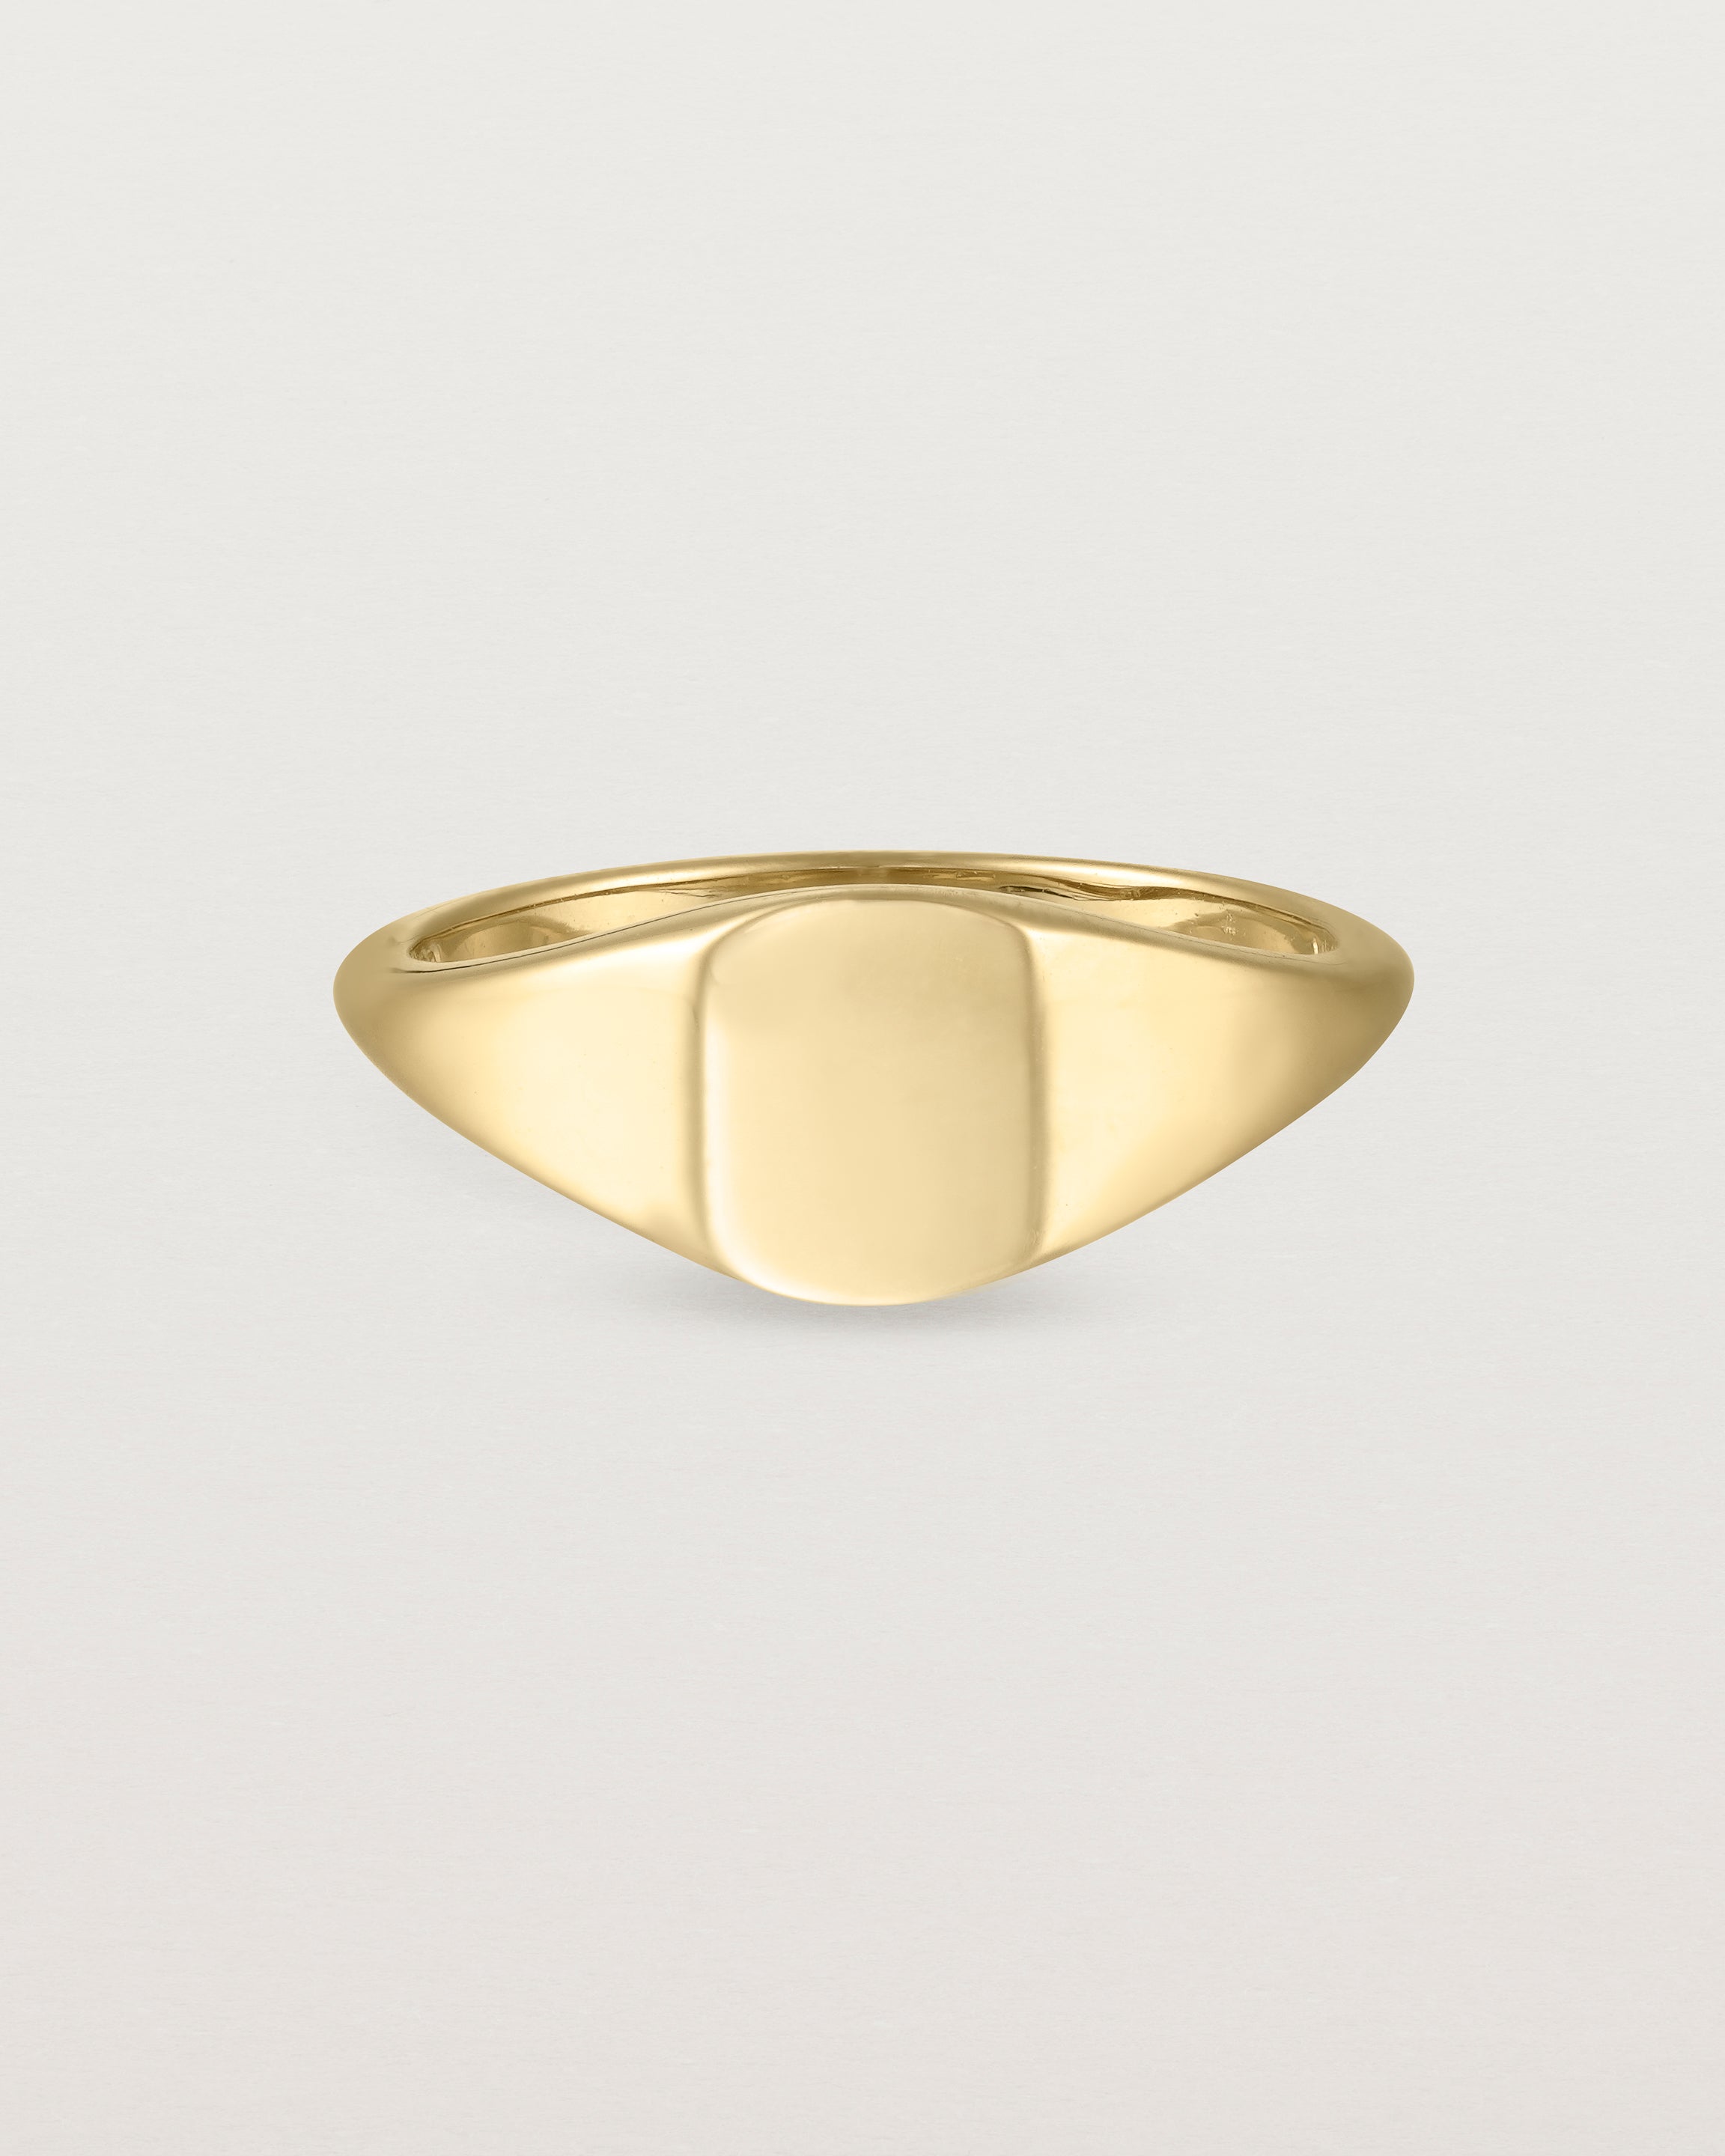 Front view of a simple signet with an elongated rectangular face in yellow gold